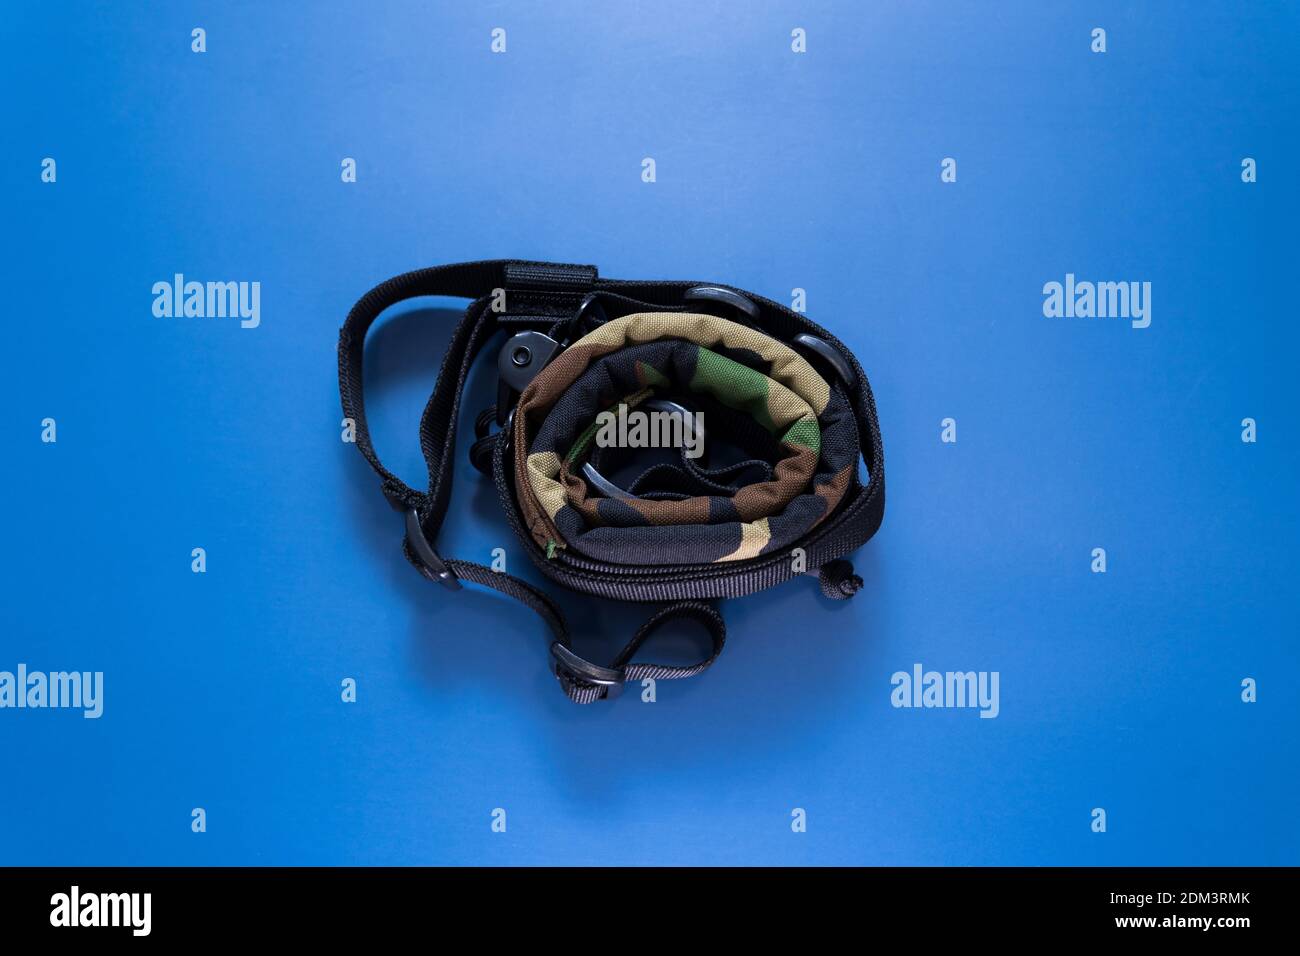 A top view of a camouflage military strap on a blue background Stock Photo